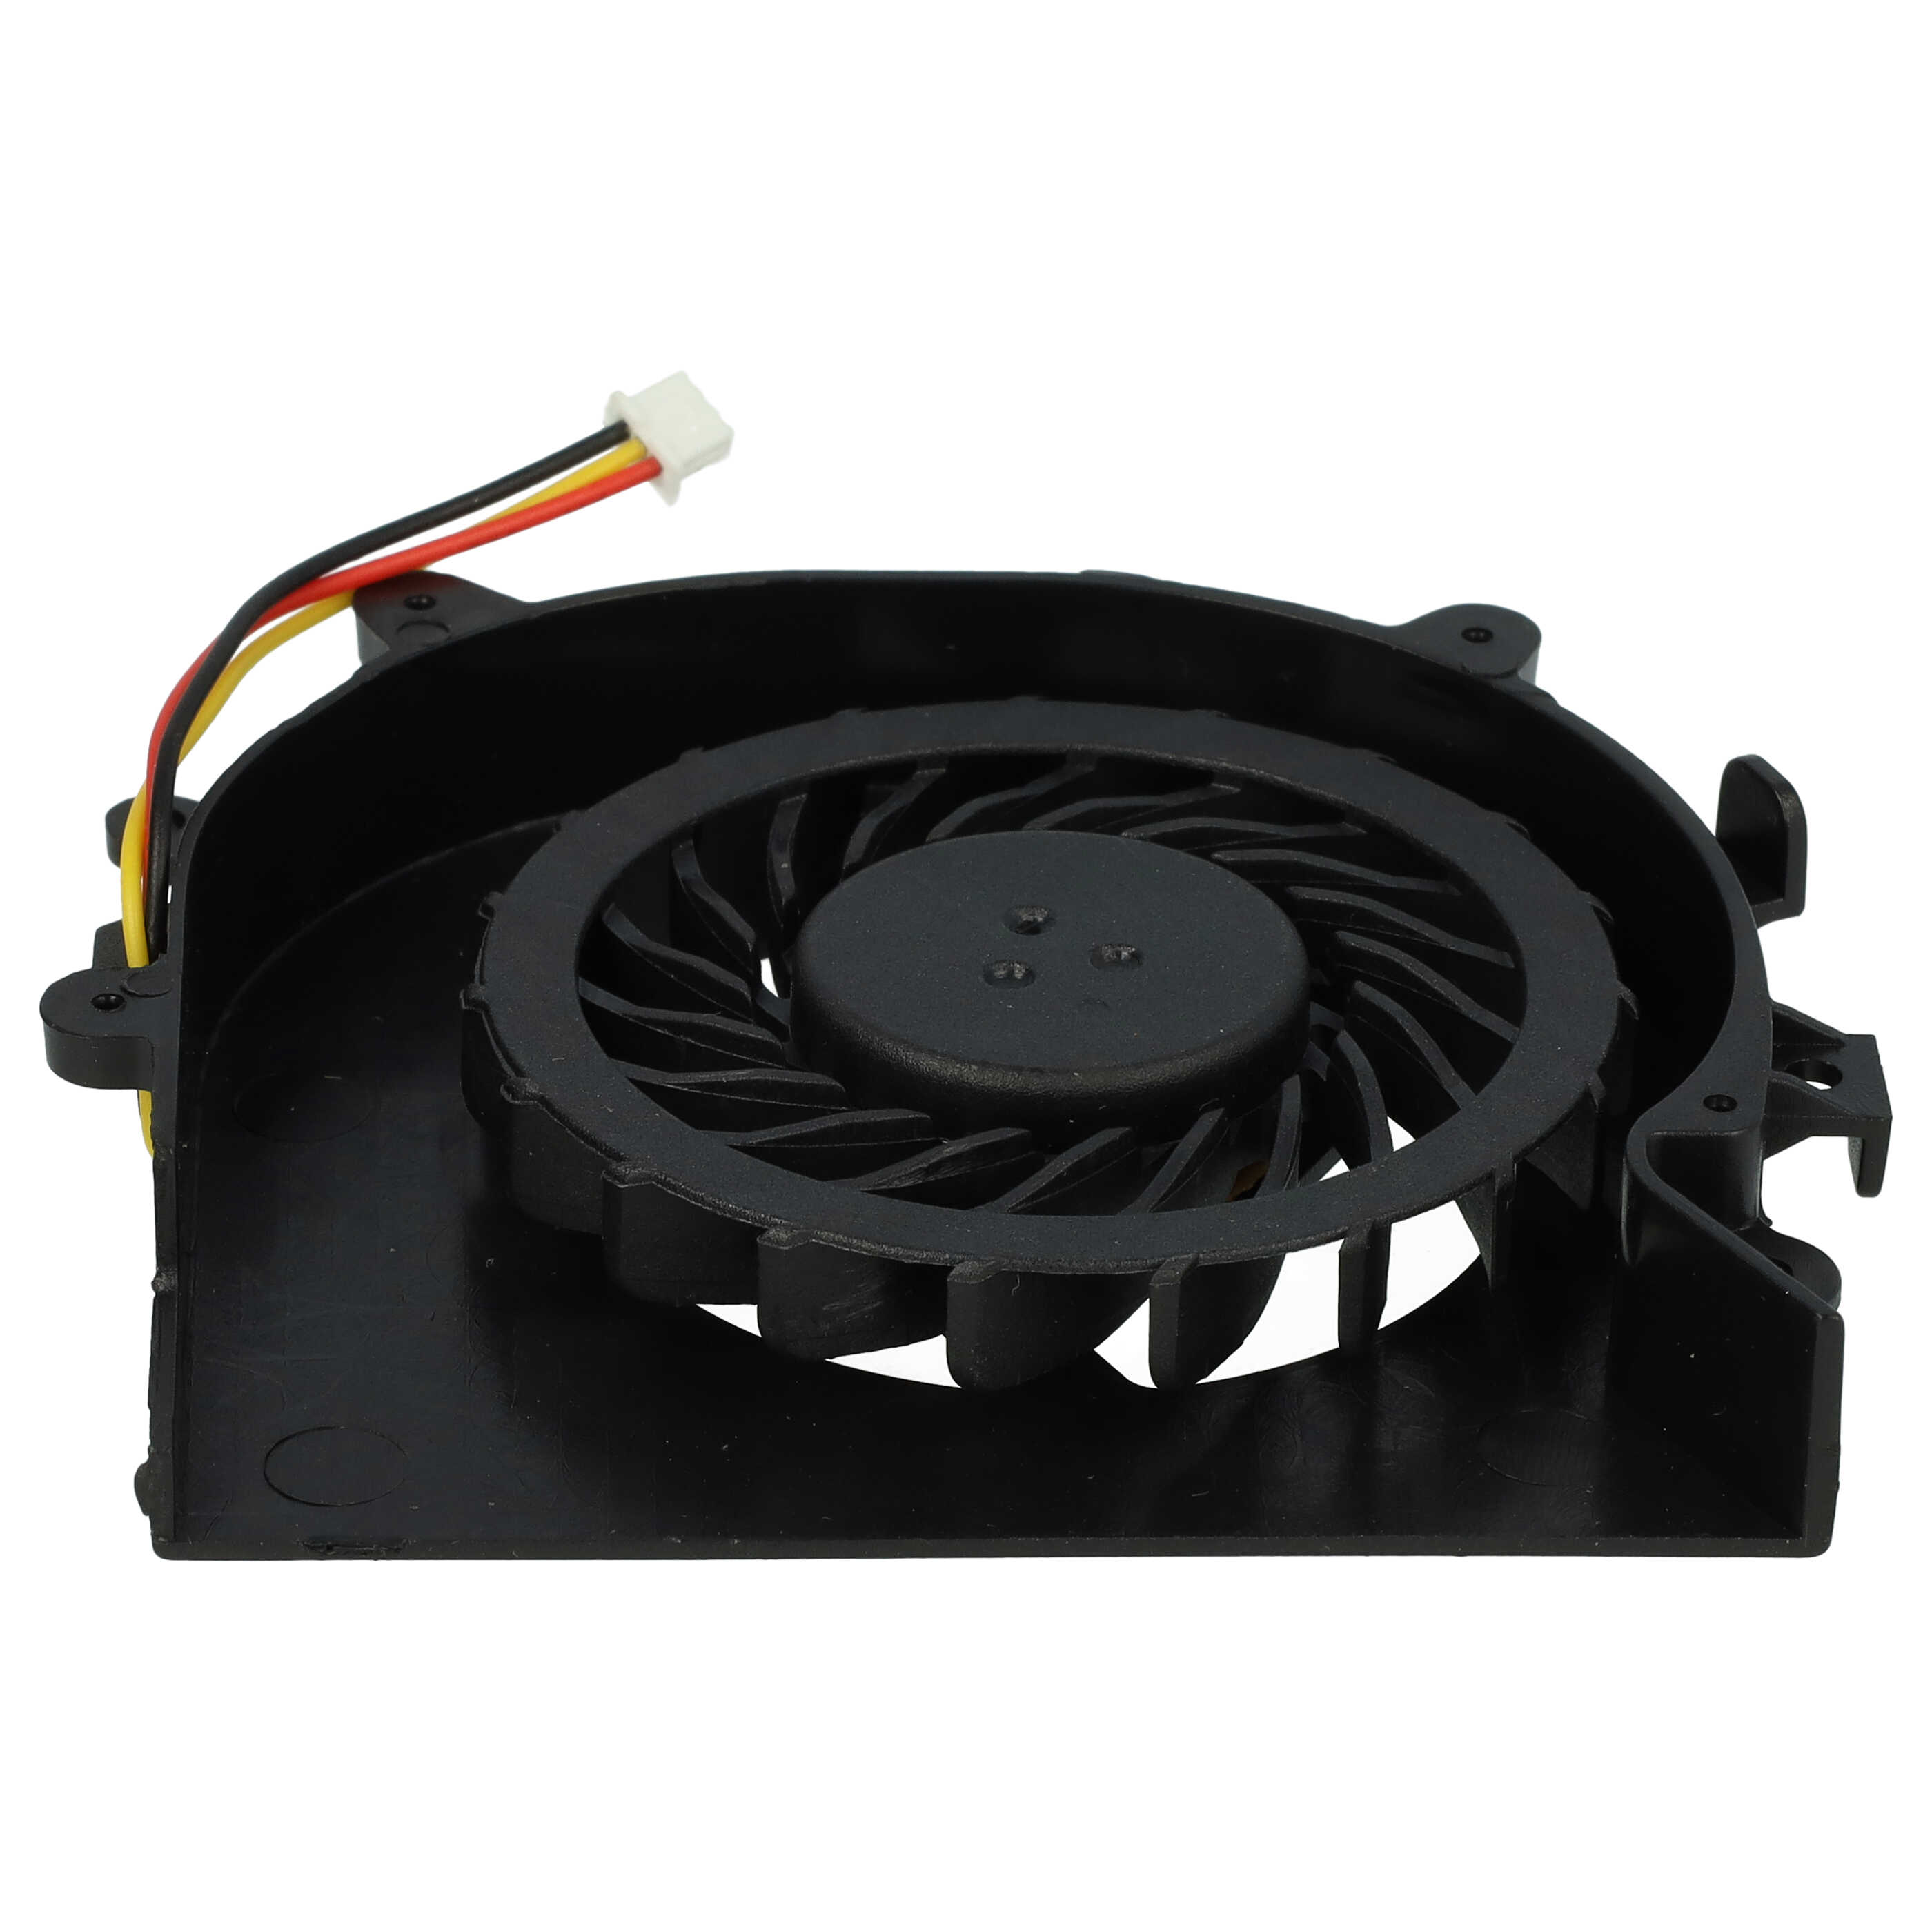 CPU / GPU Fan suitable for Sony Vaio VPC-EA1S1E/L Notebook 79 x 66 x 12 mm